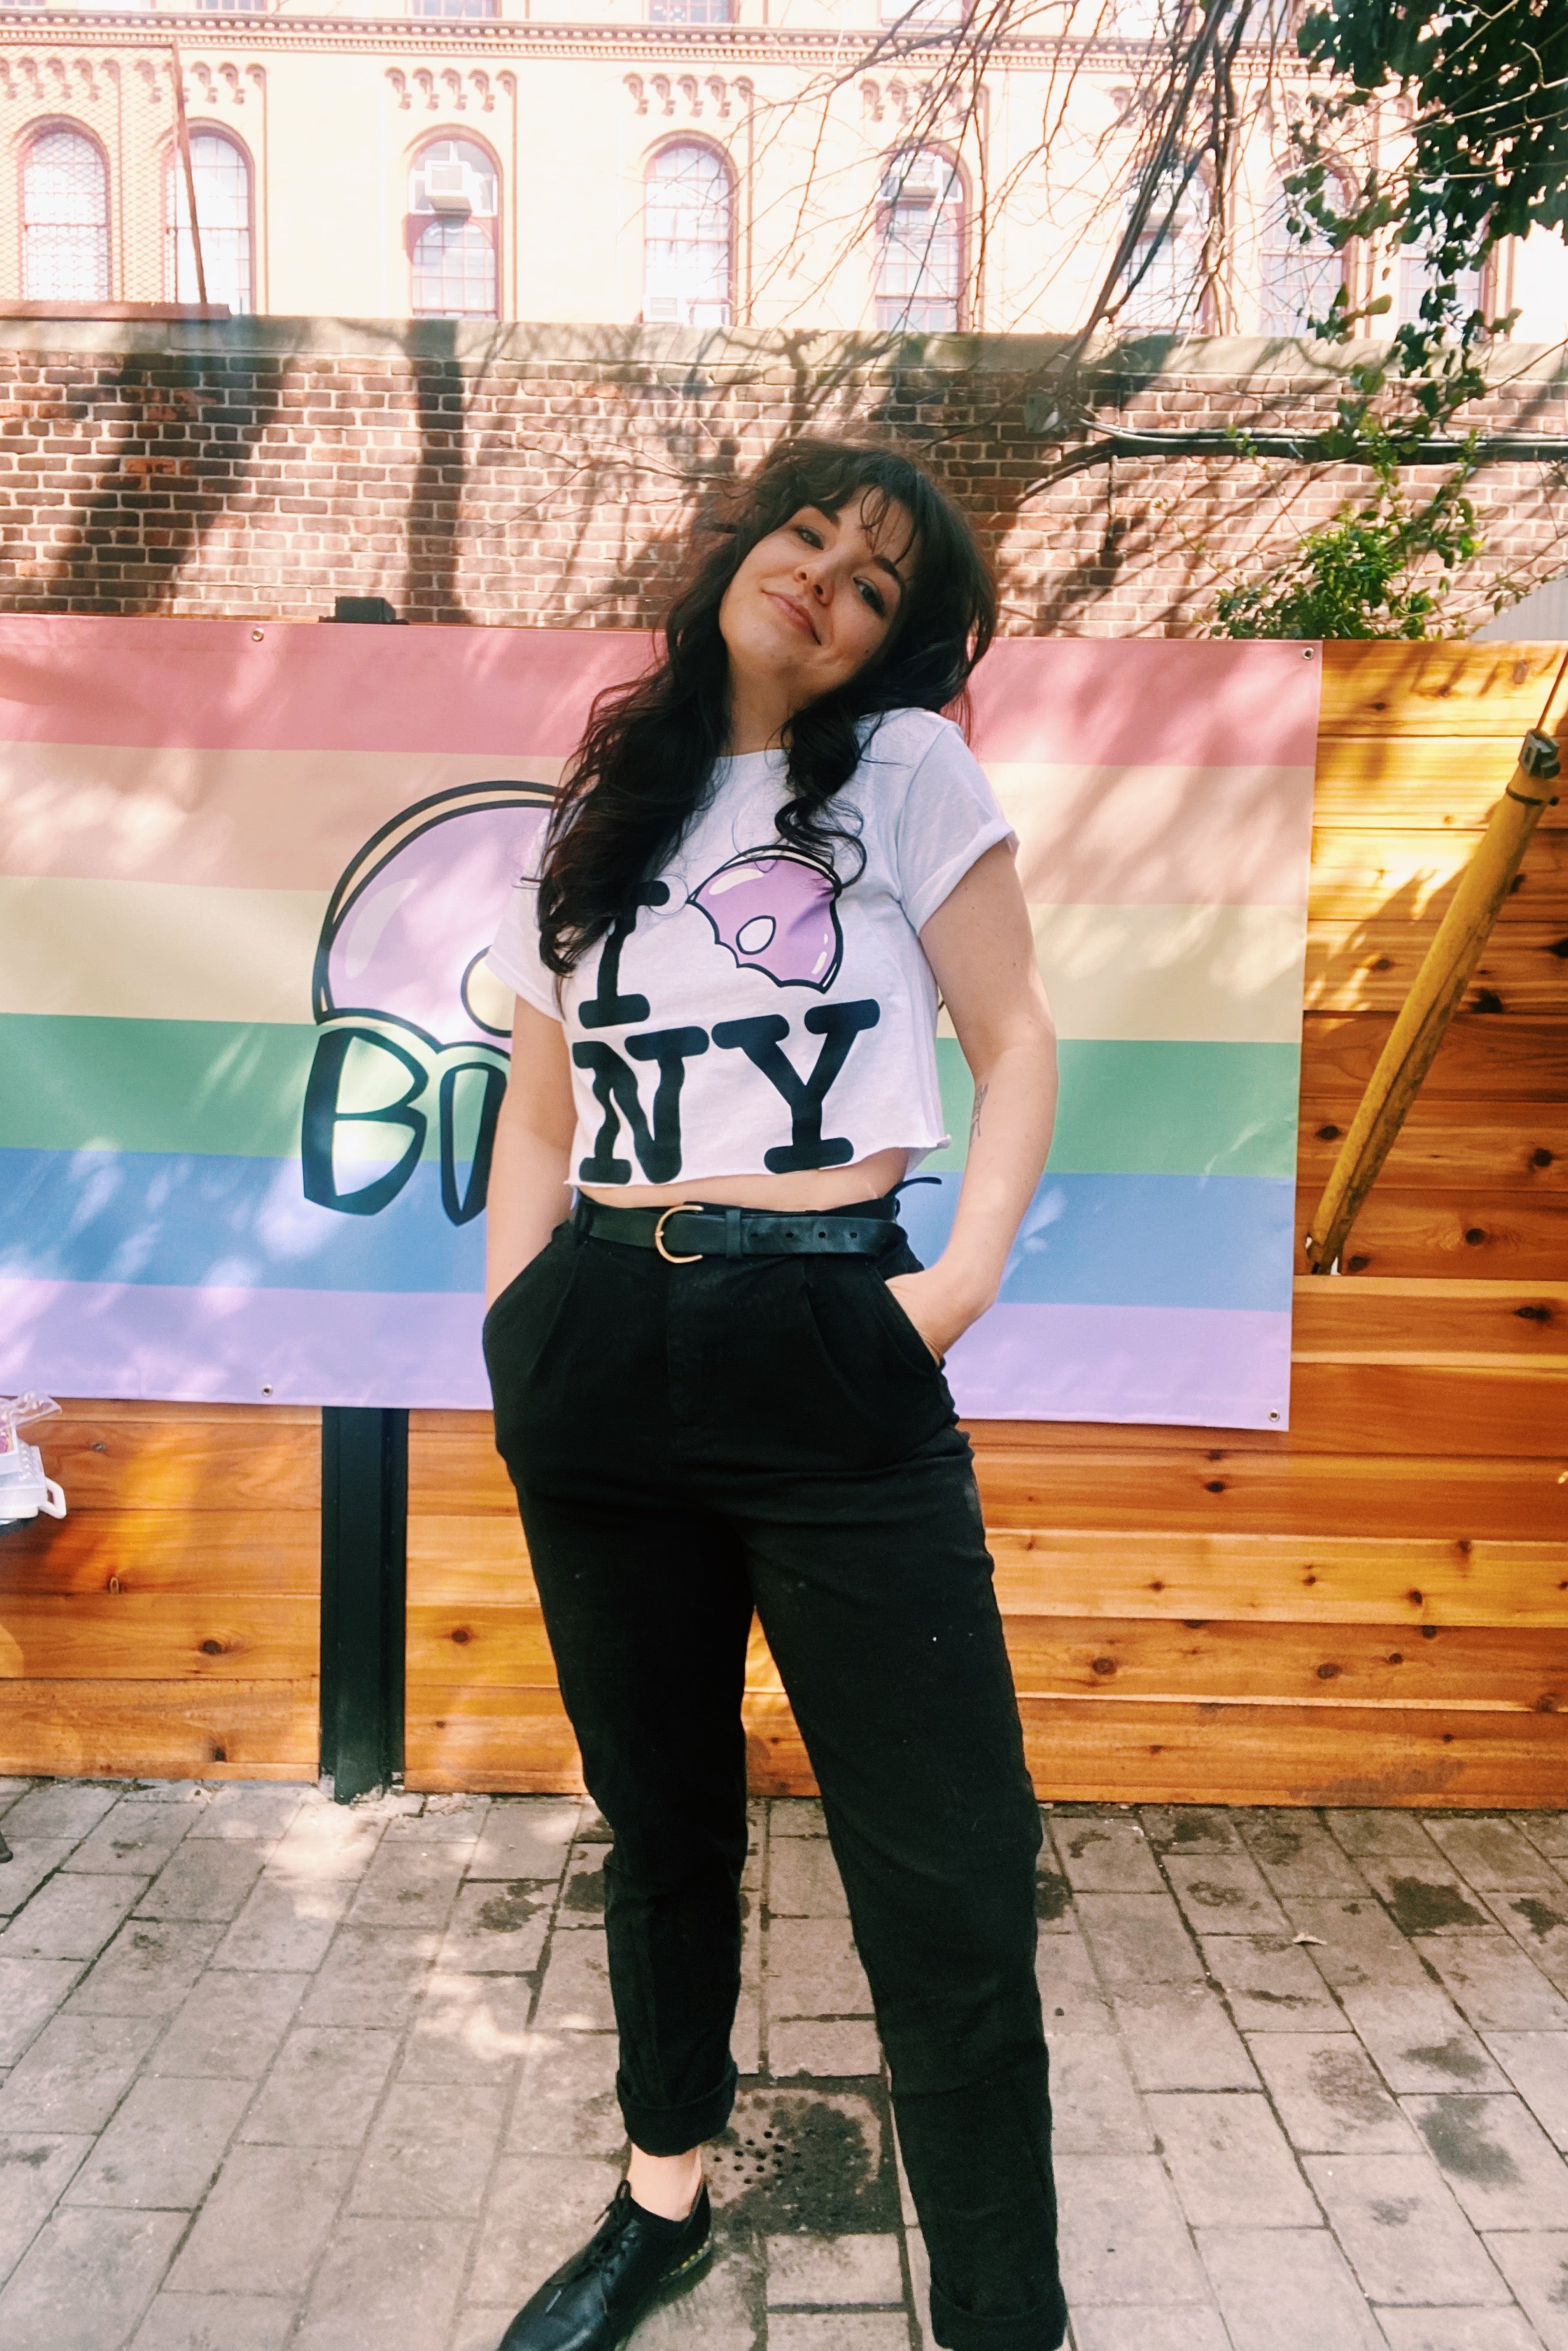 queer owned mini donut bakery in brooklyn nyc selling baked, artisan, custom, mini donuts and merchandise like aprons, hats, and t-shirts. custom dessert catering nyc the gay donut 